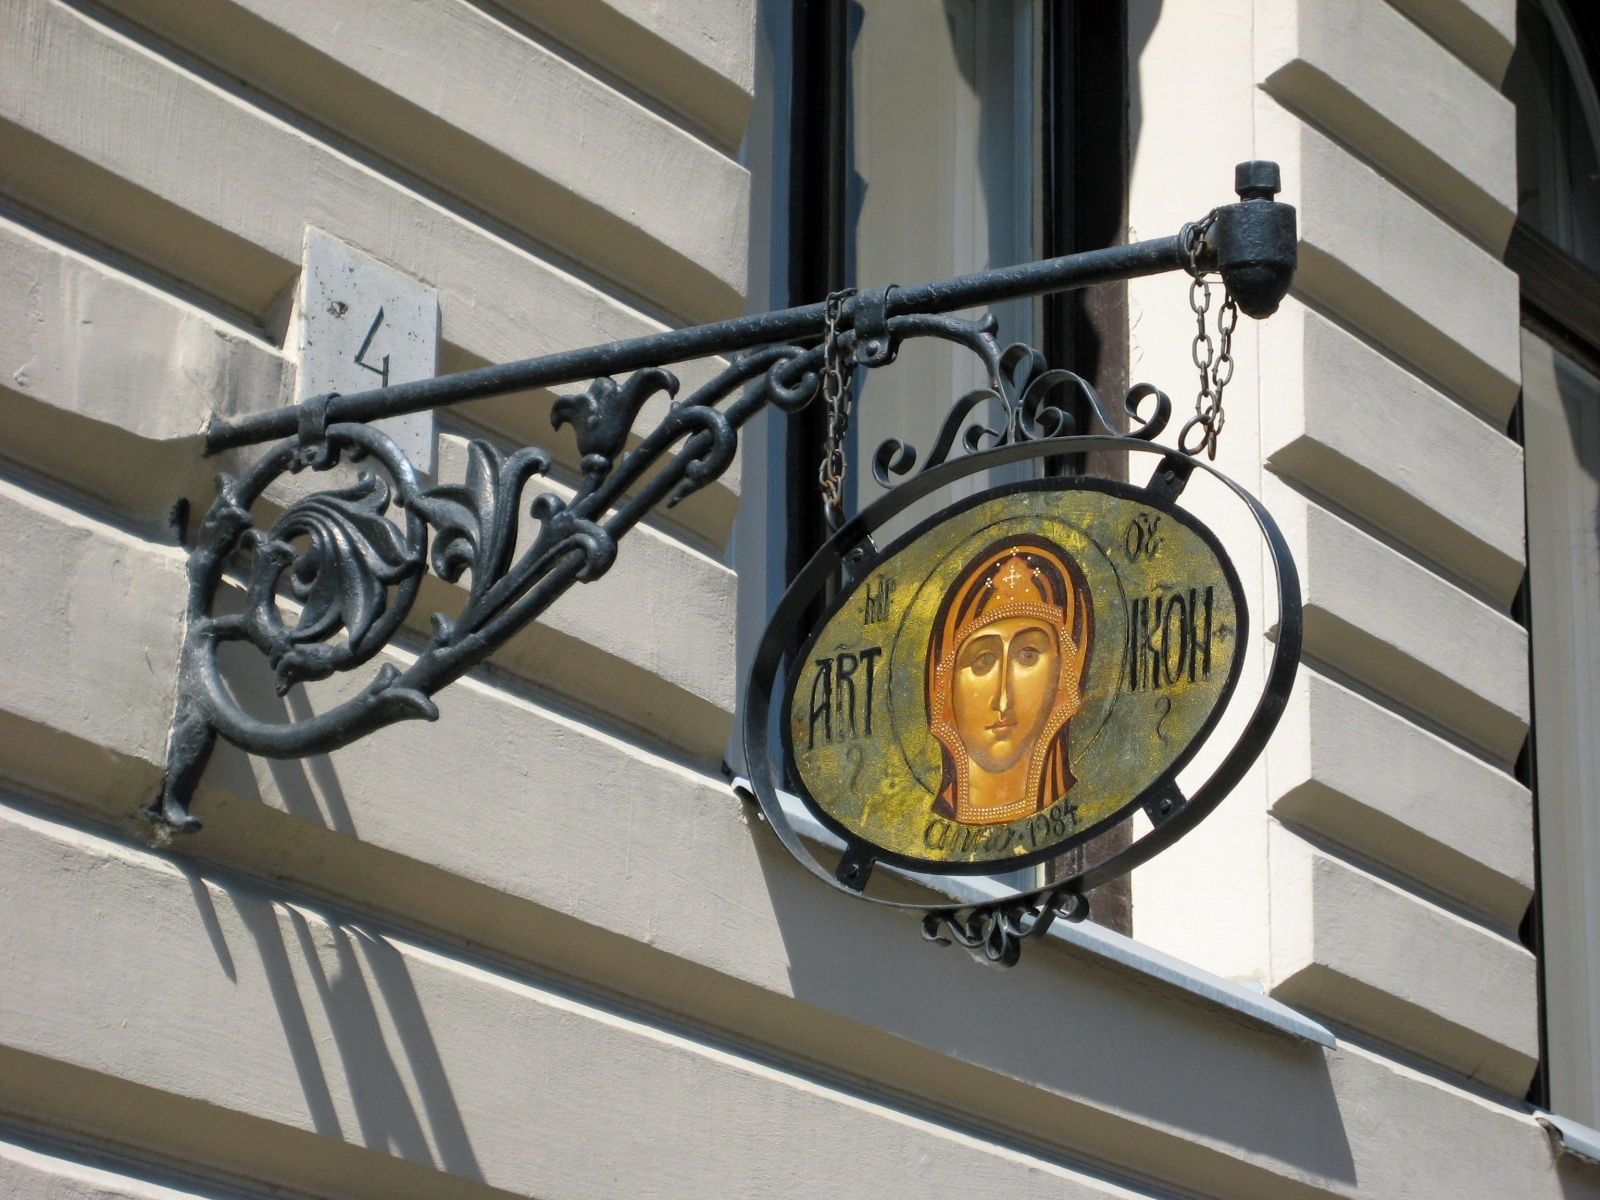 Art store sign, Castle Hill, Budapest, Hungary